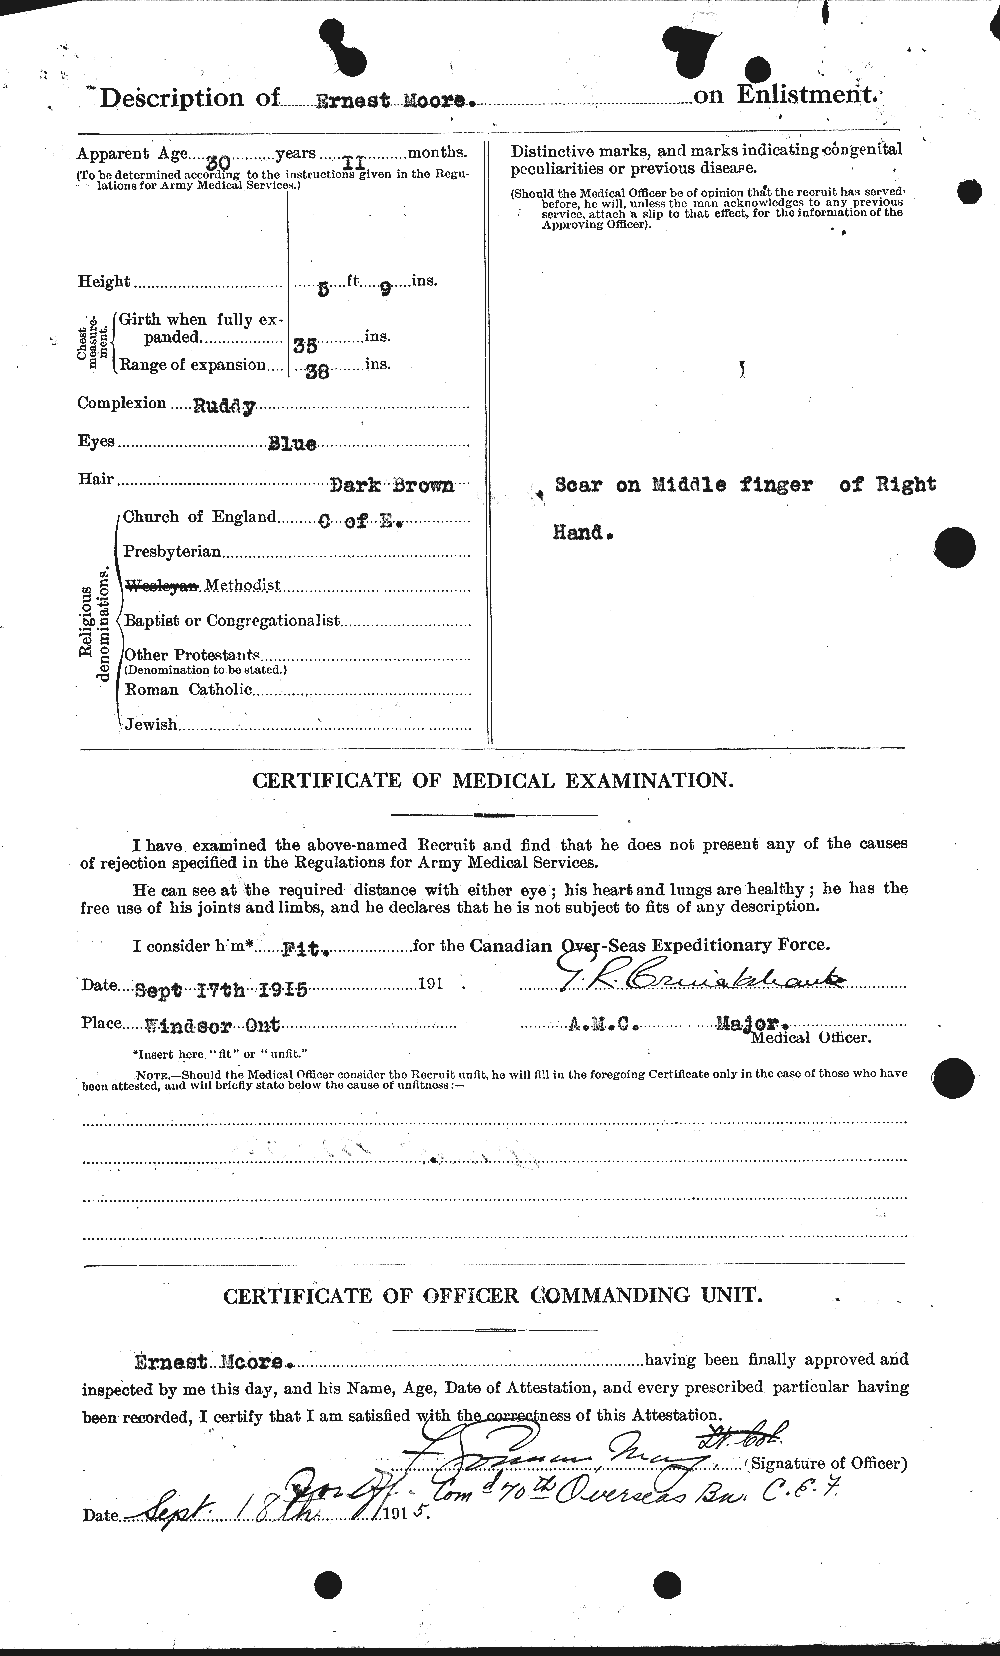 Personnel Records of the First World War - CEF 506659b